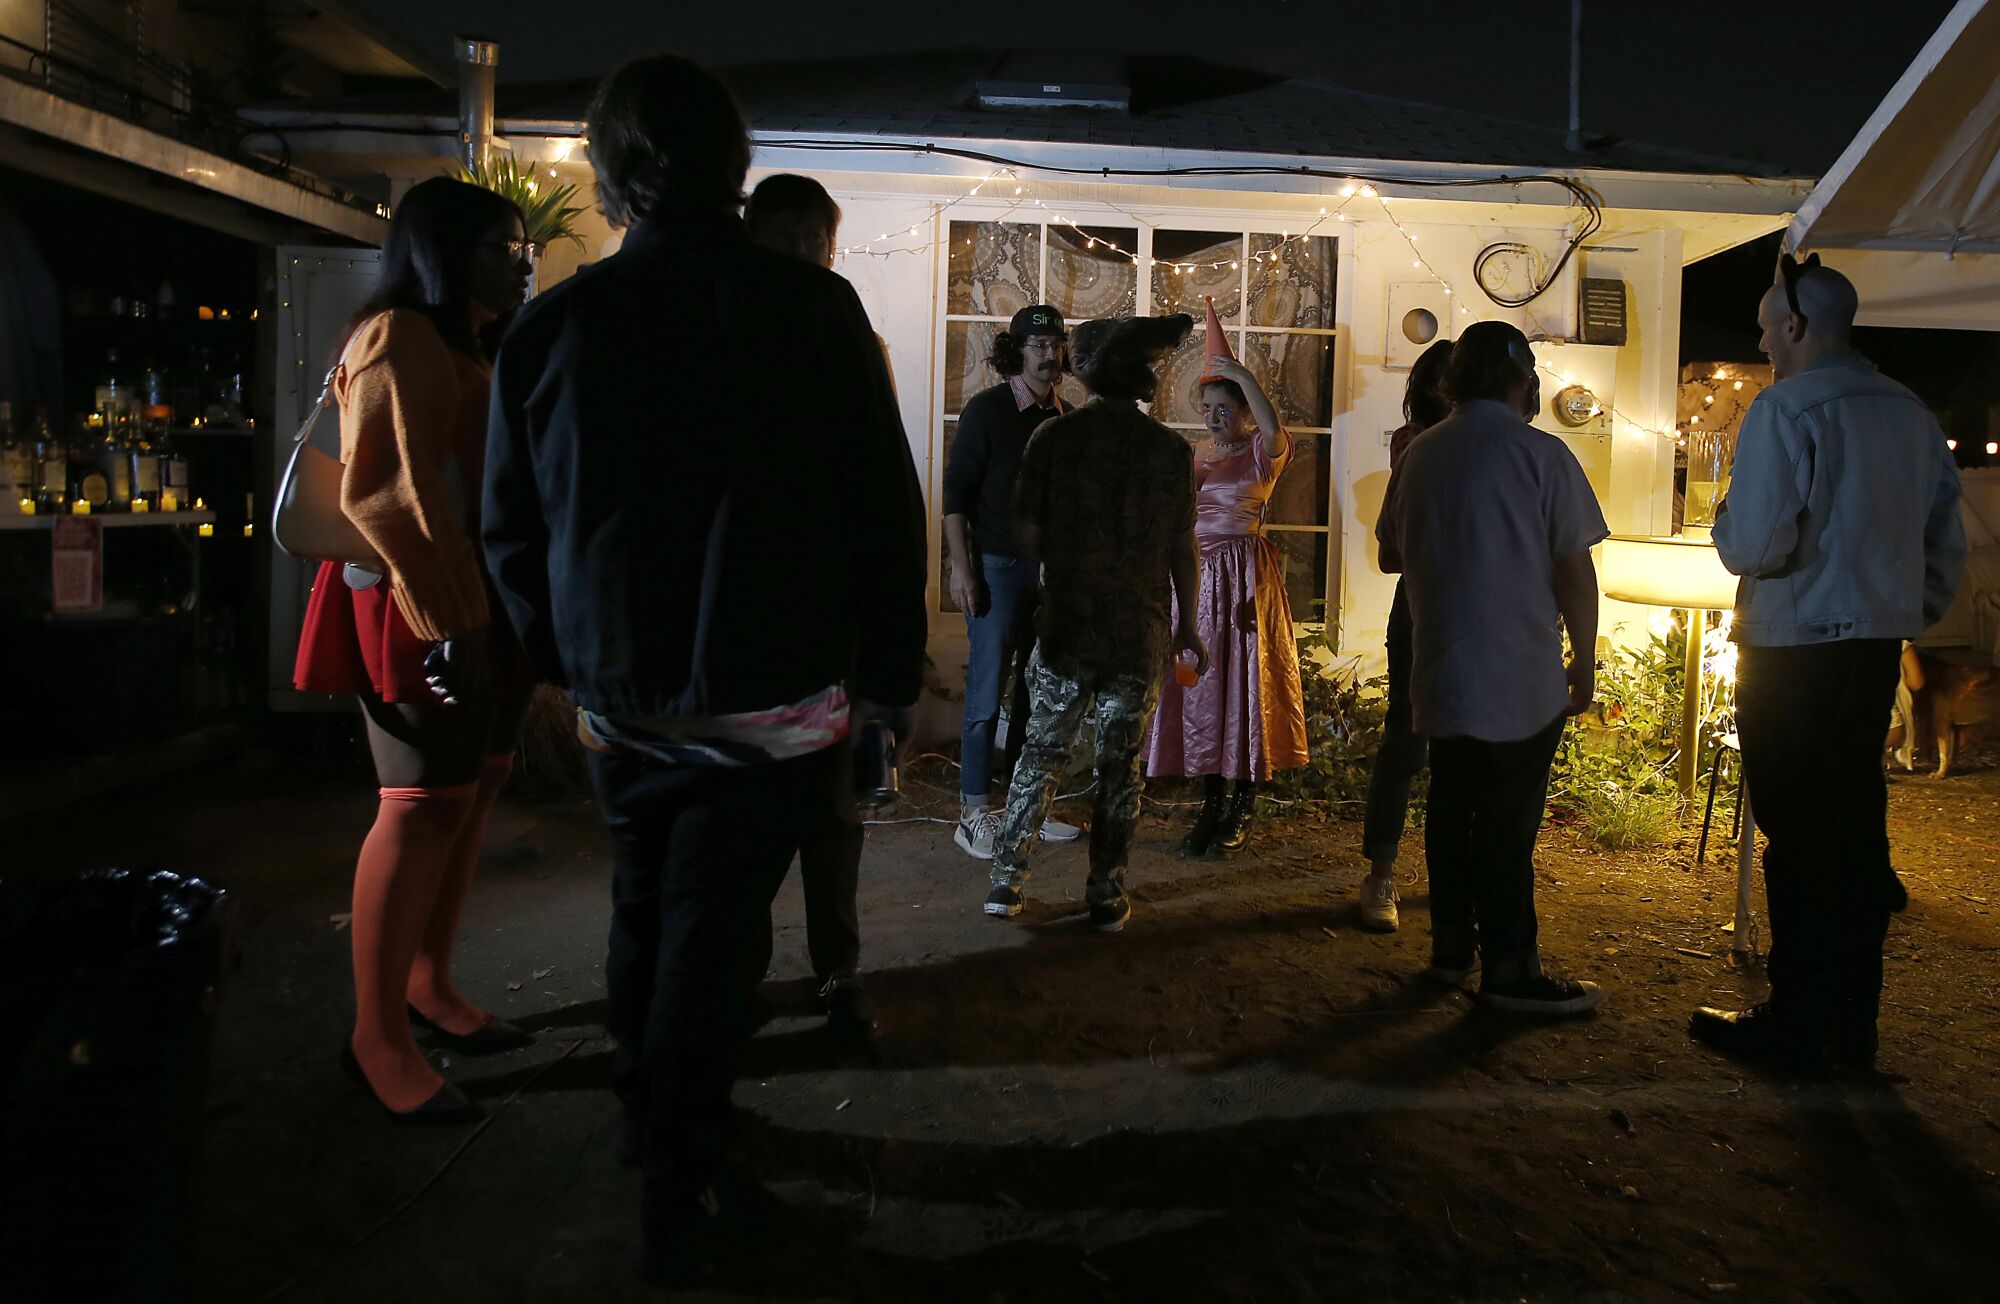 Congregation of people in costumes in the dark in a backyard